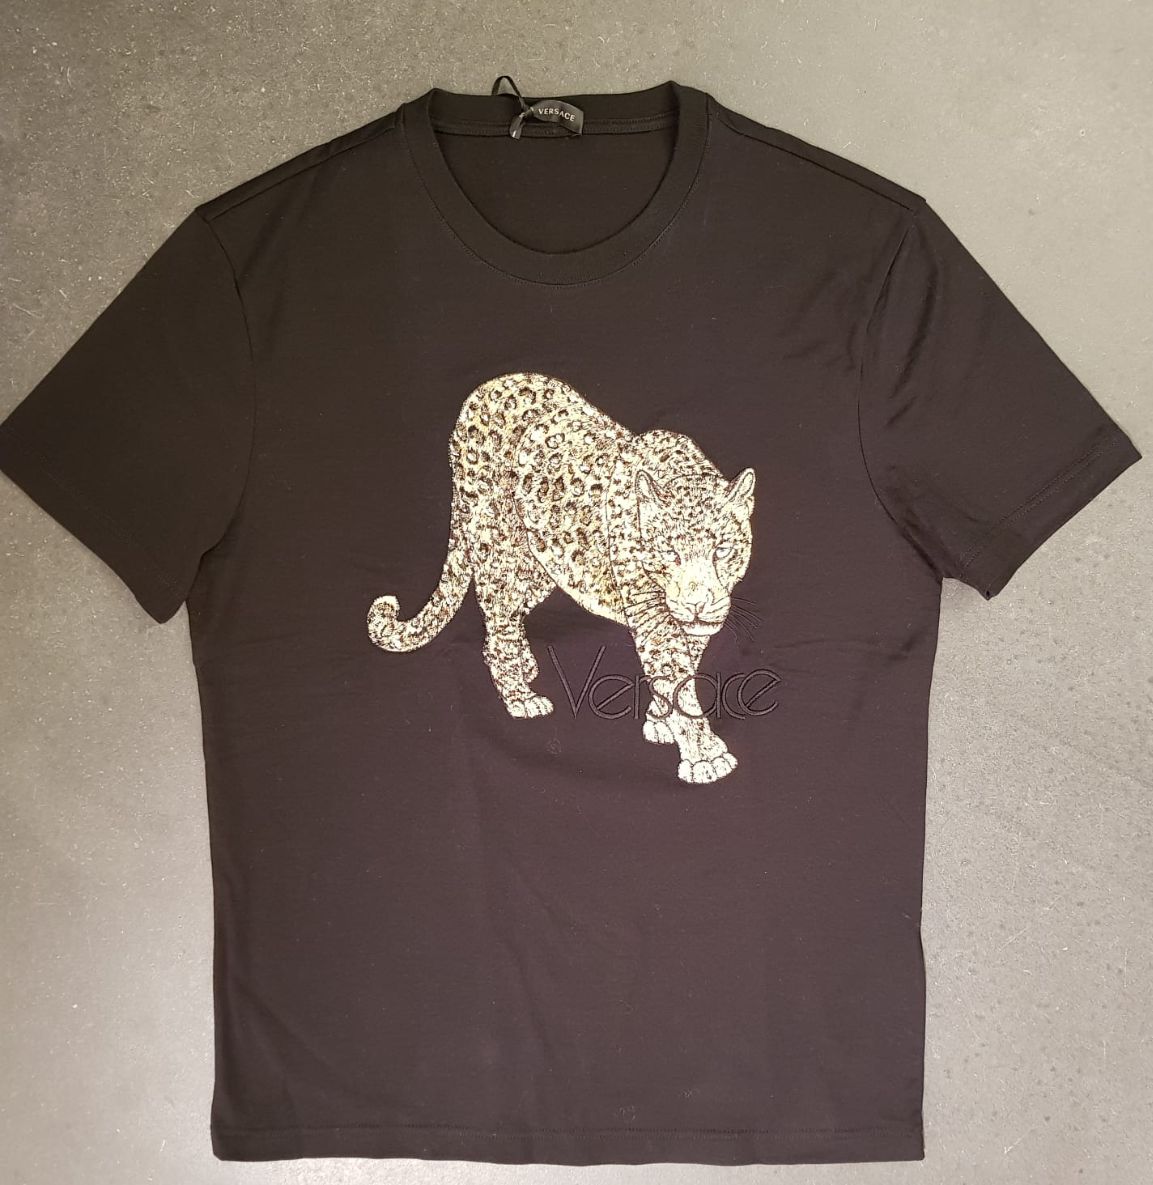 Versace - T-shirt gold Tiger embroided